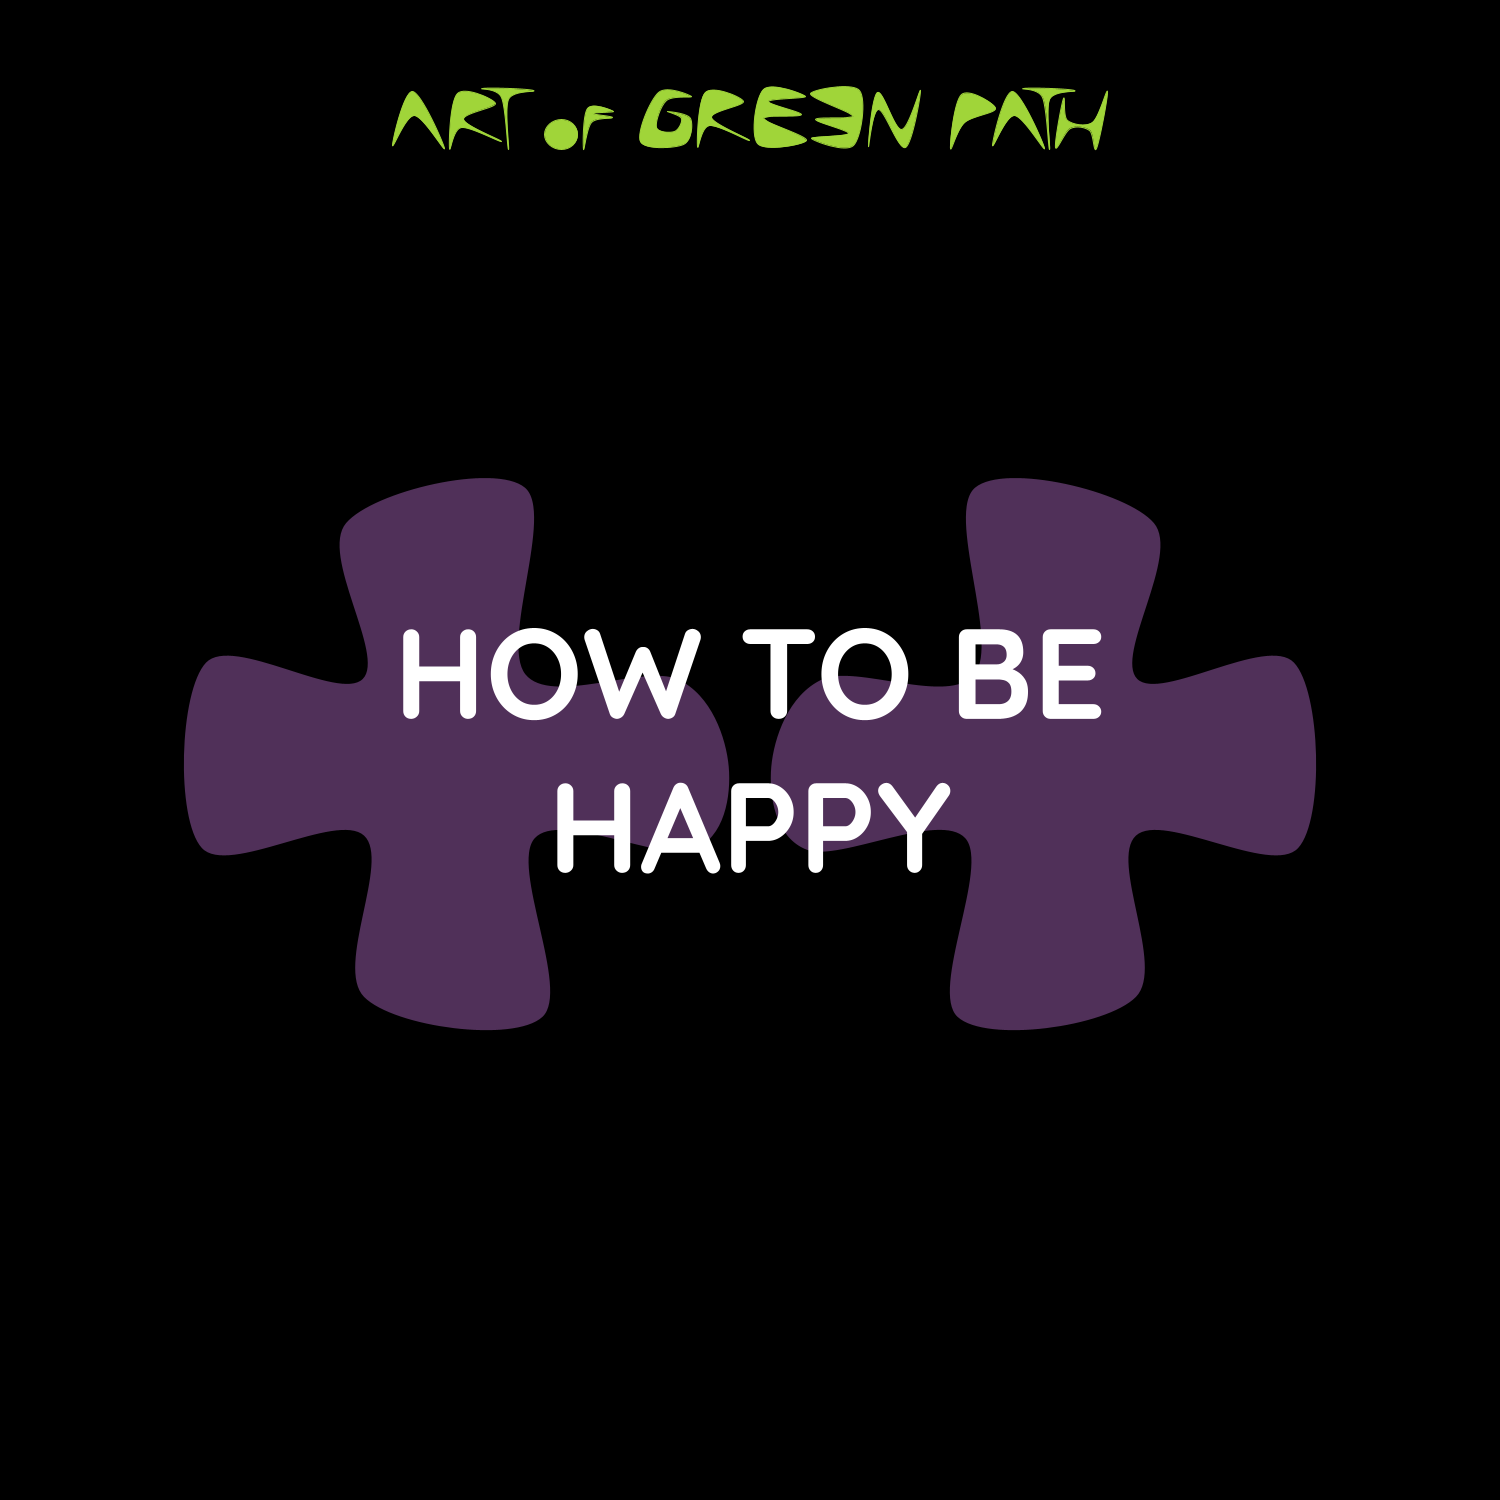 Art Of Green Path - Know Yourself - How To Be Happy